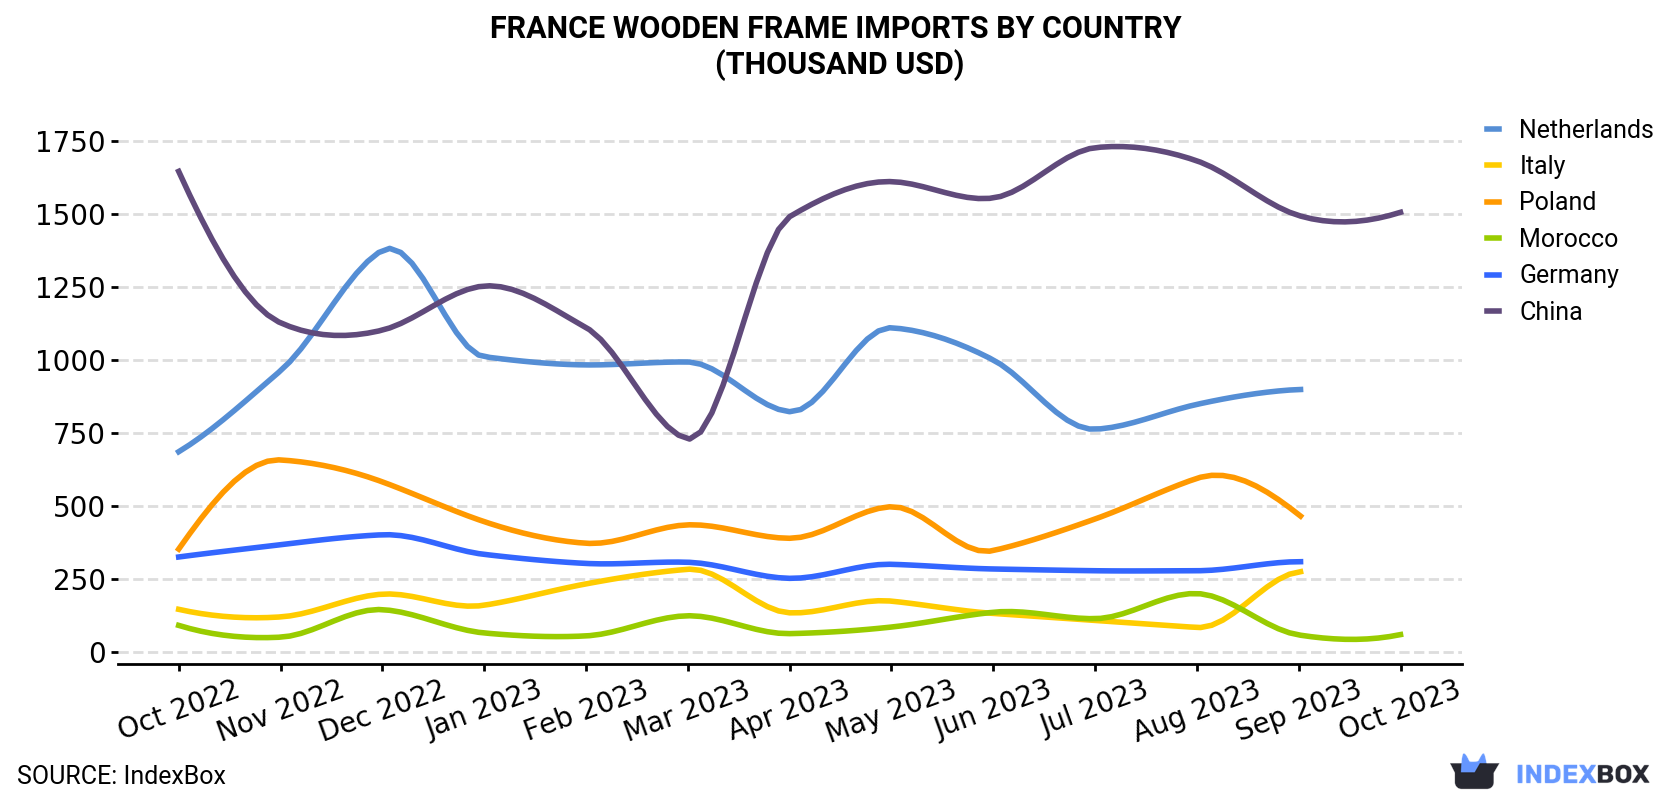 France Wooden Frame Imports By Country (Thousand USD)